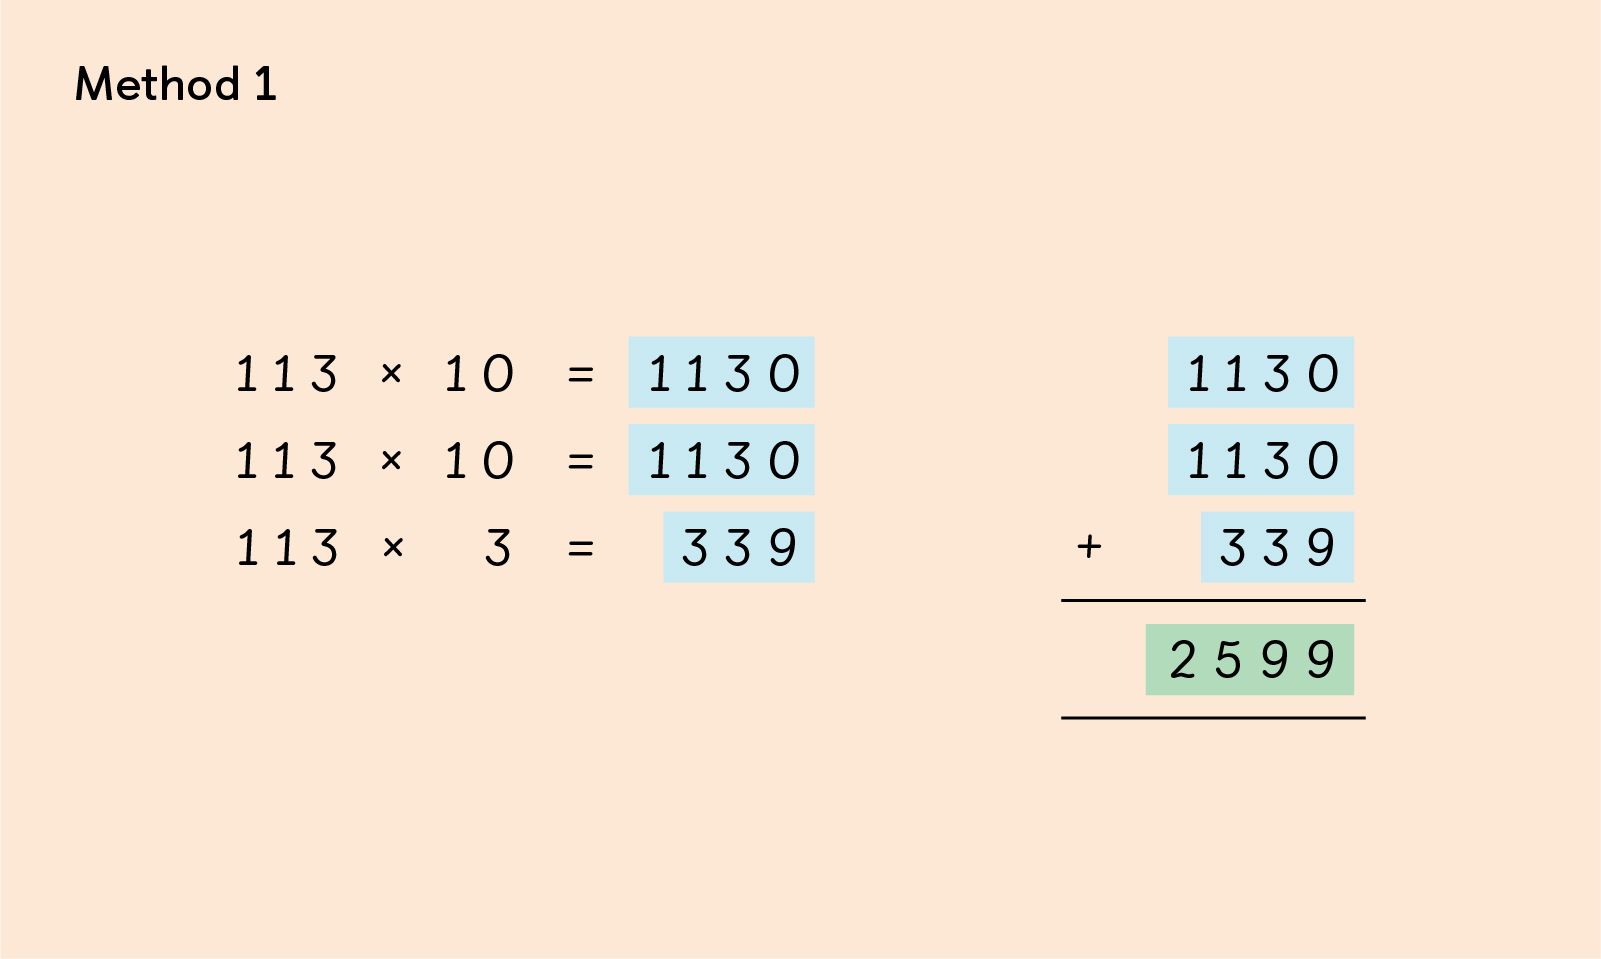 Method 1 To solve the maths multiplication problem 23 x 113, the problem was broken up or dissected into three easy multiplications (113 x 10, 113 x 10 and 113 x 3) and the three products then added together to reach an answer of 2599.